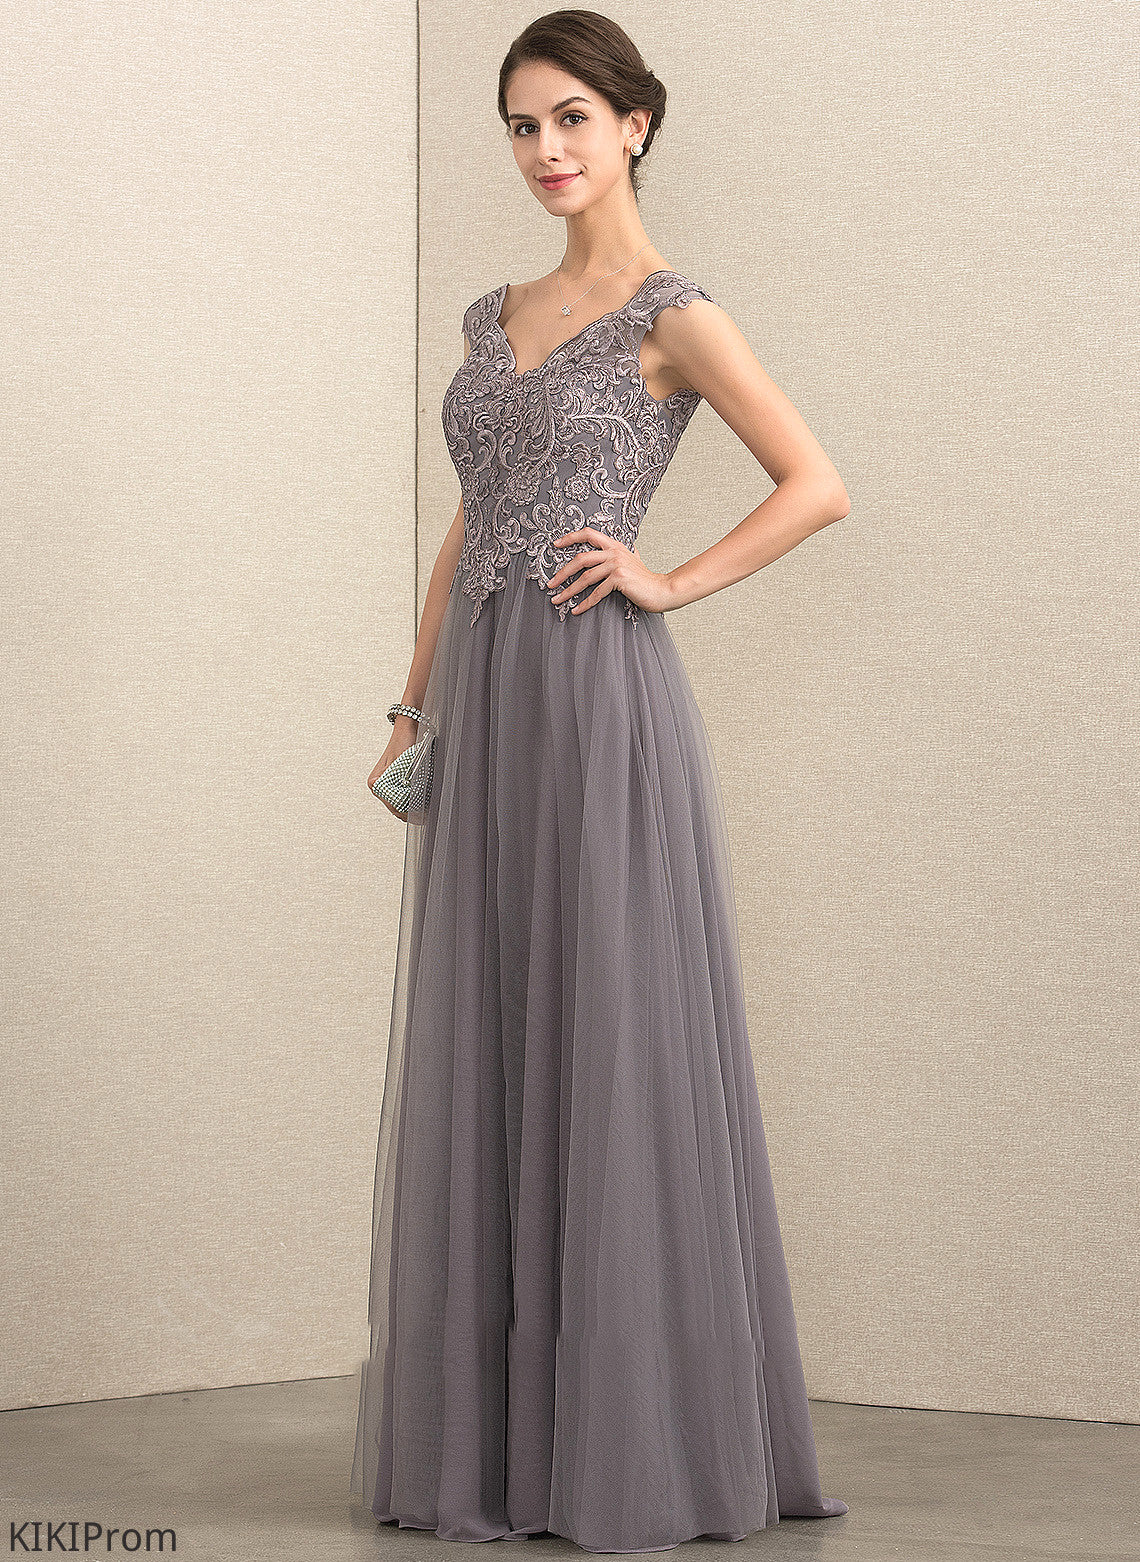 of the Yadira A-Line/Princess Dress V-neck Lace Floor-Length Mother Mother of the Bride Dresses With Bride Sequins Tulle